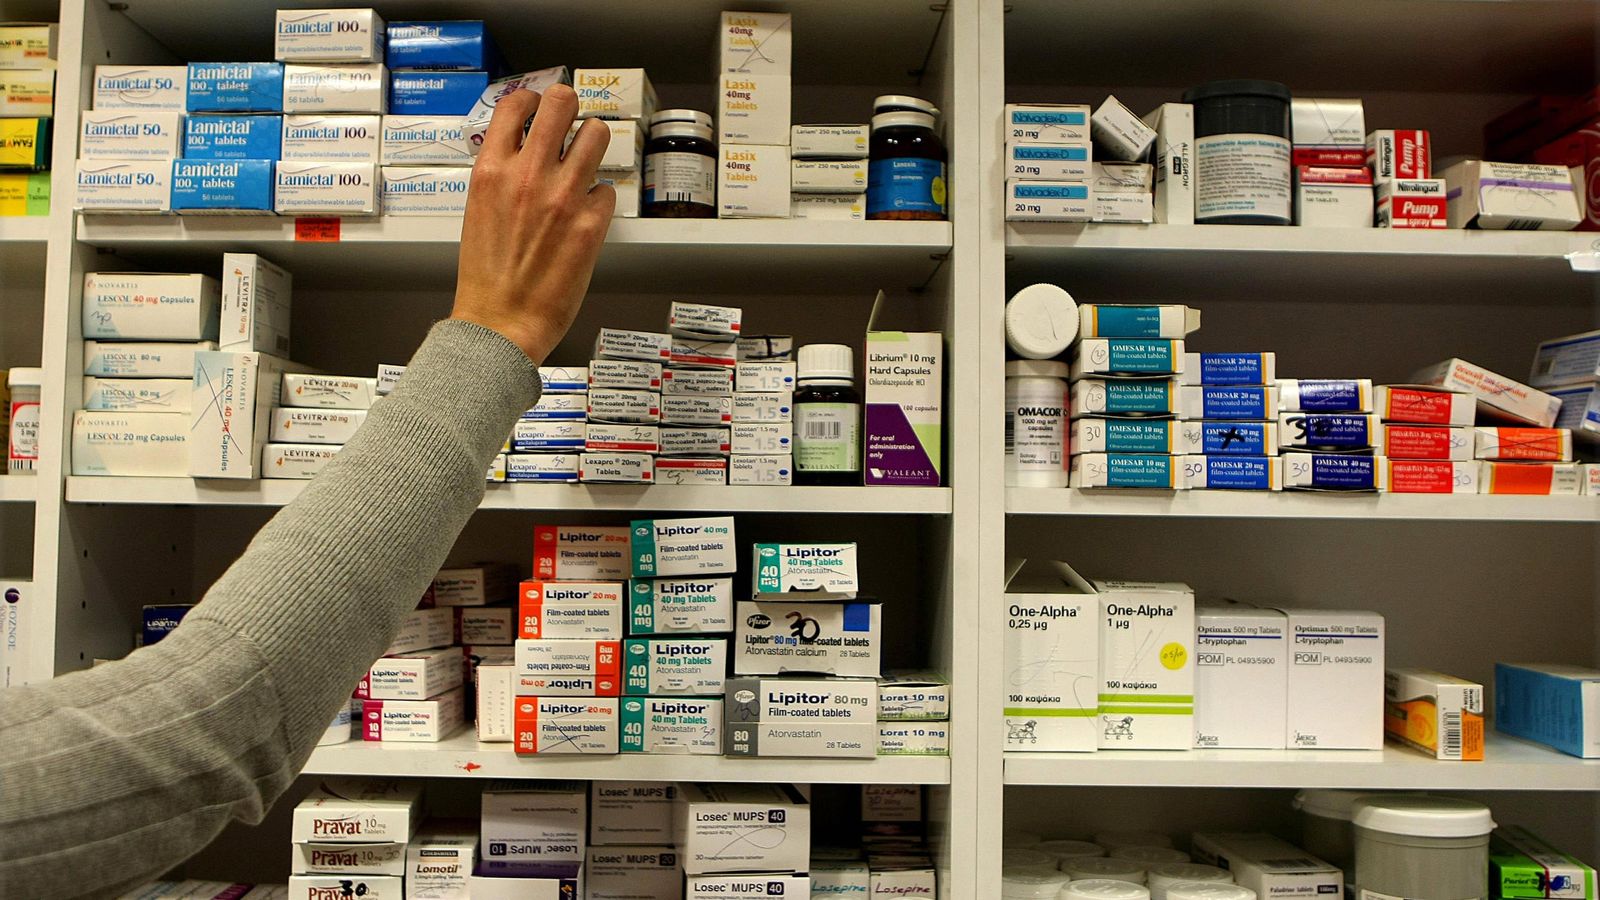 Pharmacies to be able to prescribe medication under plans to free up GP appointments